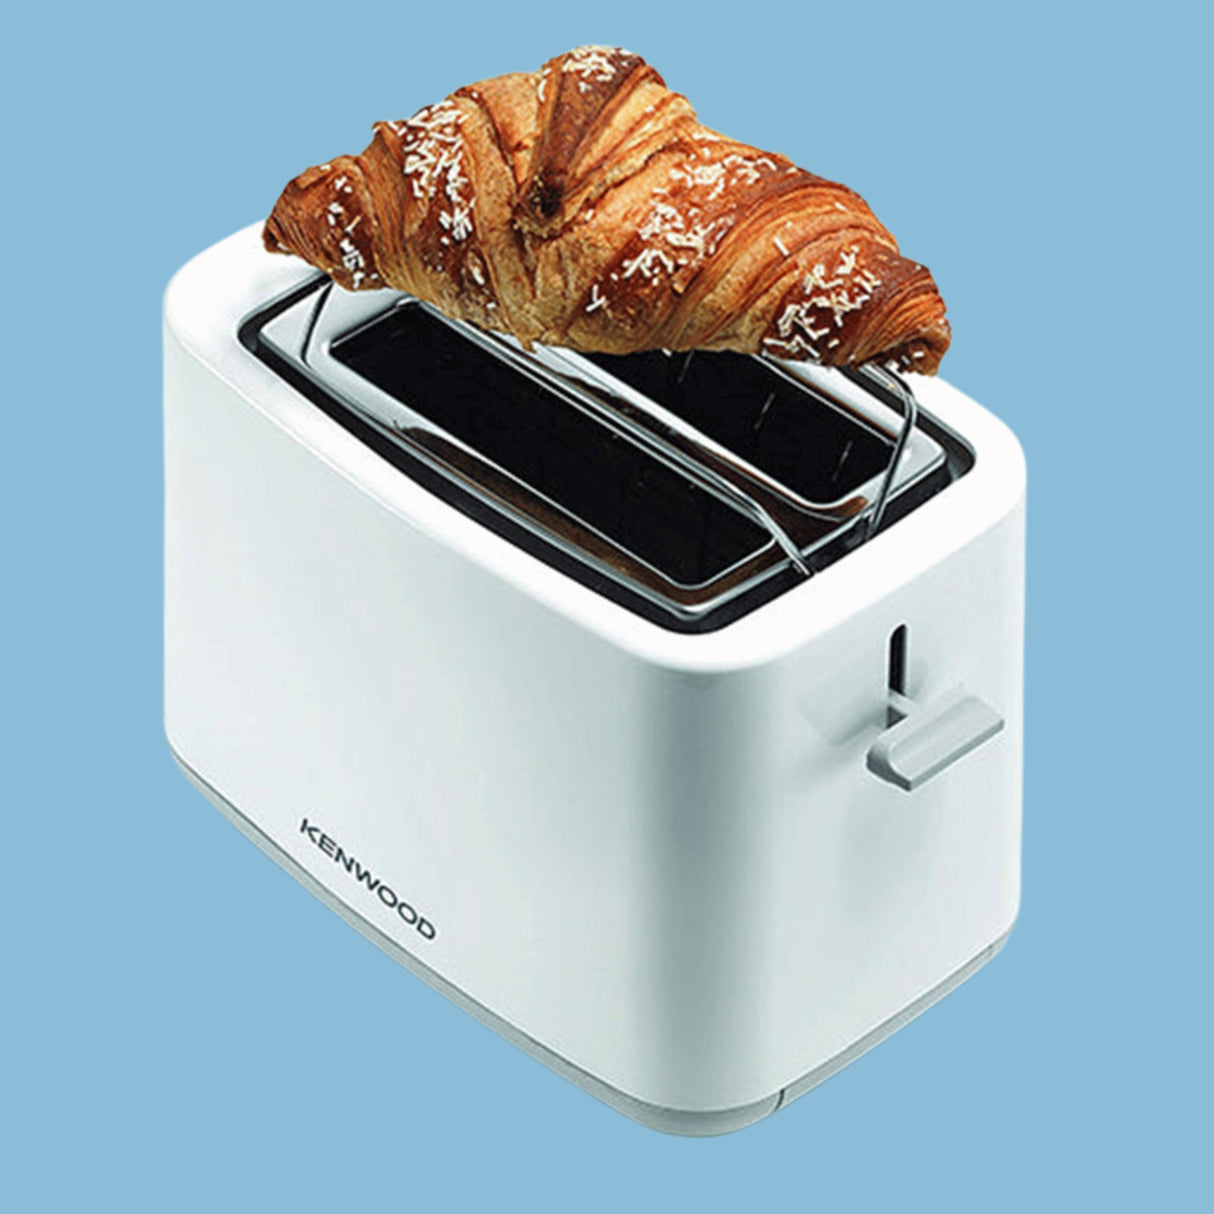 Kenwood Everything Essentials Bread Toaster, TCP01 - White - KWT Tech Mart